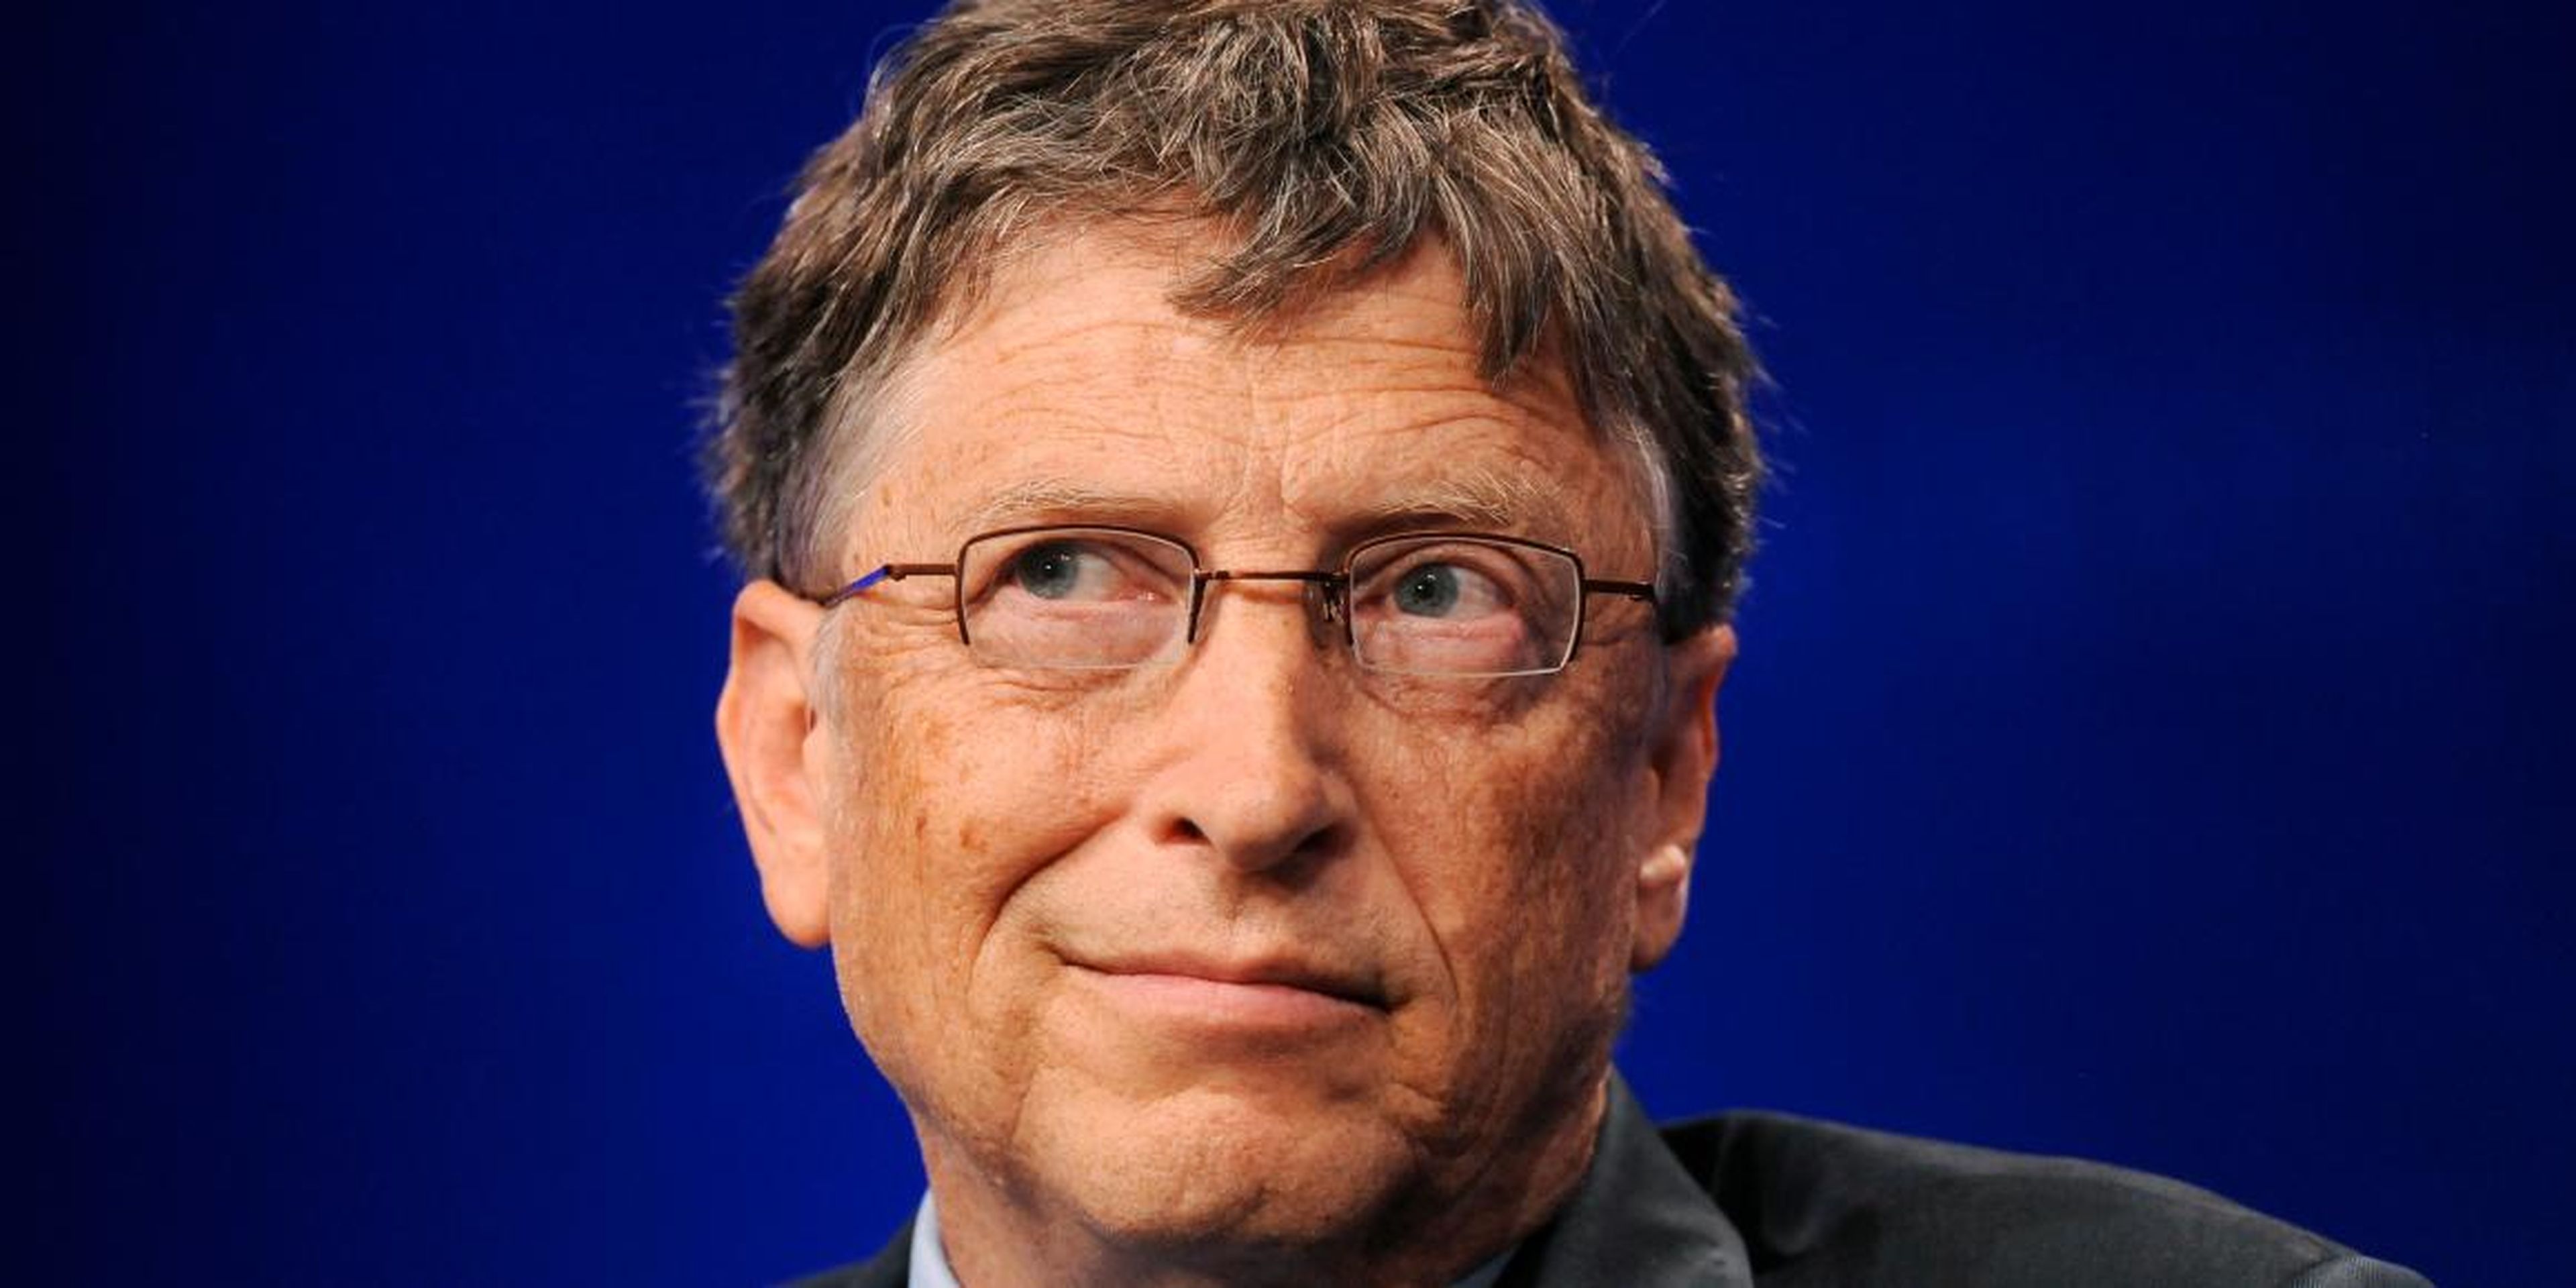 'The rich should pay more' — Bill Gates calls for higher taxes on the wealthy in New Year's Eve blog post